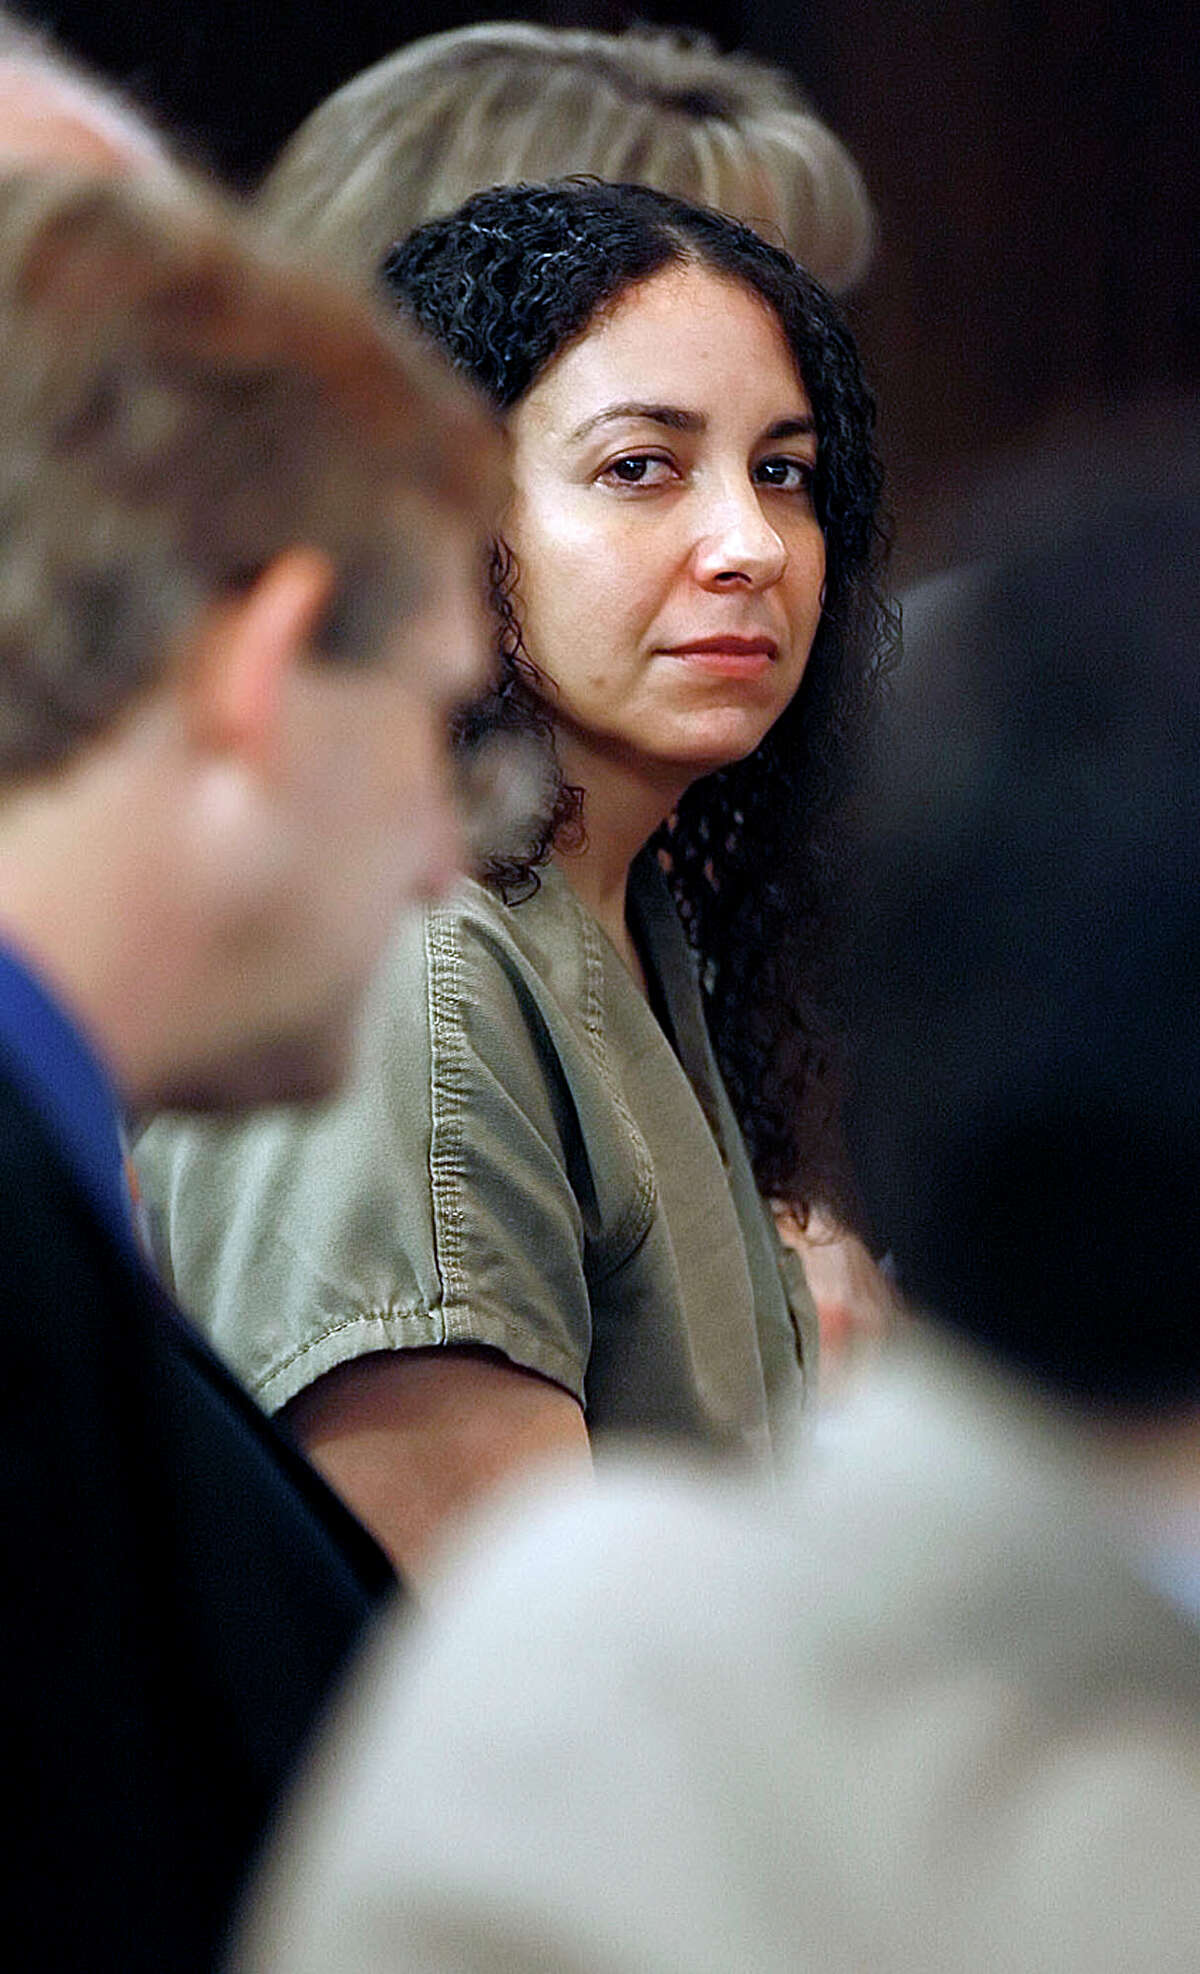 Hannah Overton takes her seat for the second day of her appeals case Tuesday, April 24, 2012 at the Nueces Courthouse in Corpus Christi, Texas. Overton was Convicted of capital murder in 2007 in connection with the death of her foster child, Andrew Burd.(AP Photo/Corpus Christi Caller-Times, Todd Yates) MANDATORY CREDIT ; TV OUT; MAGS OUT